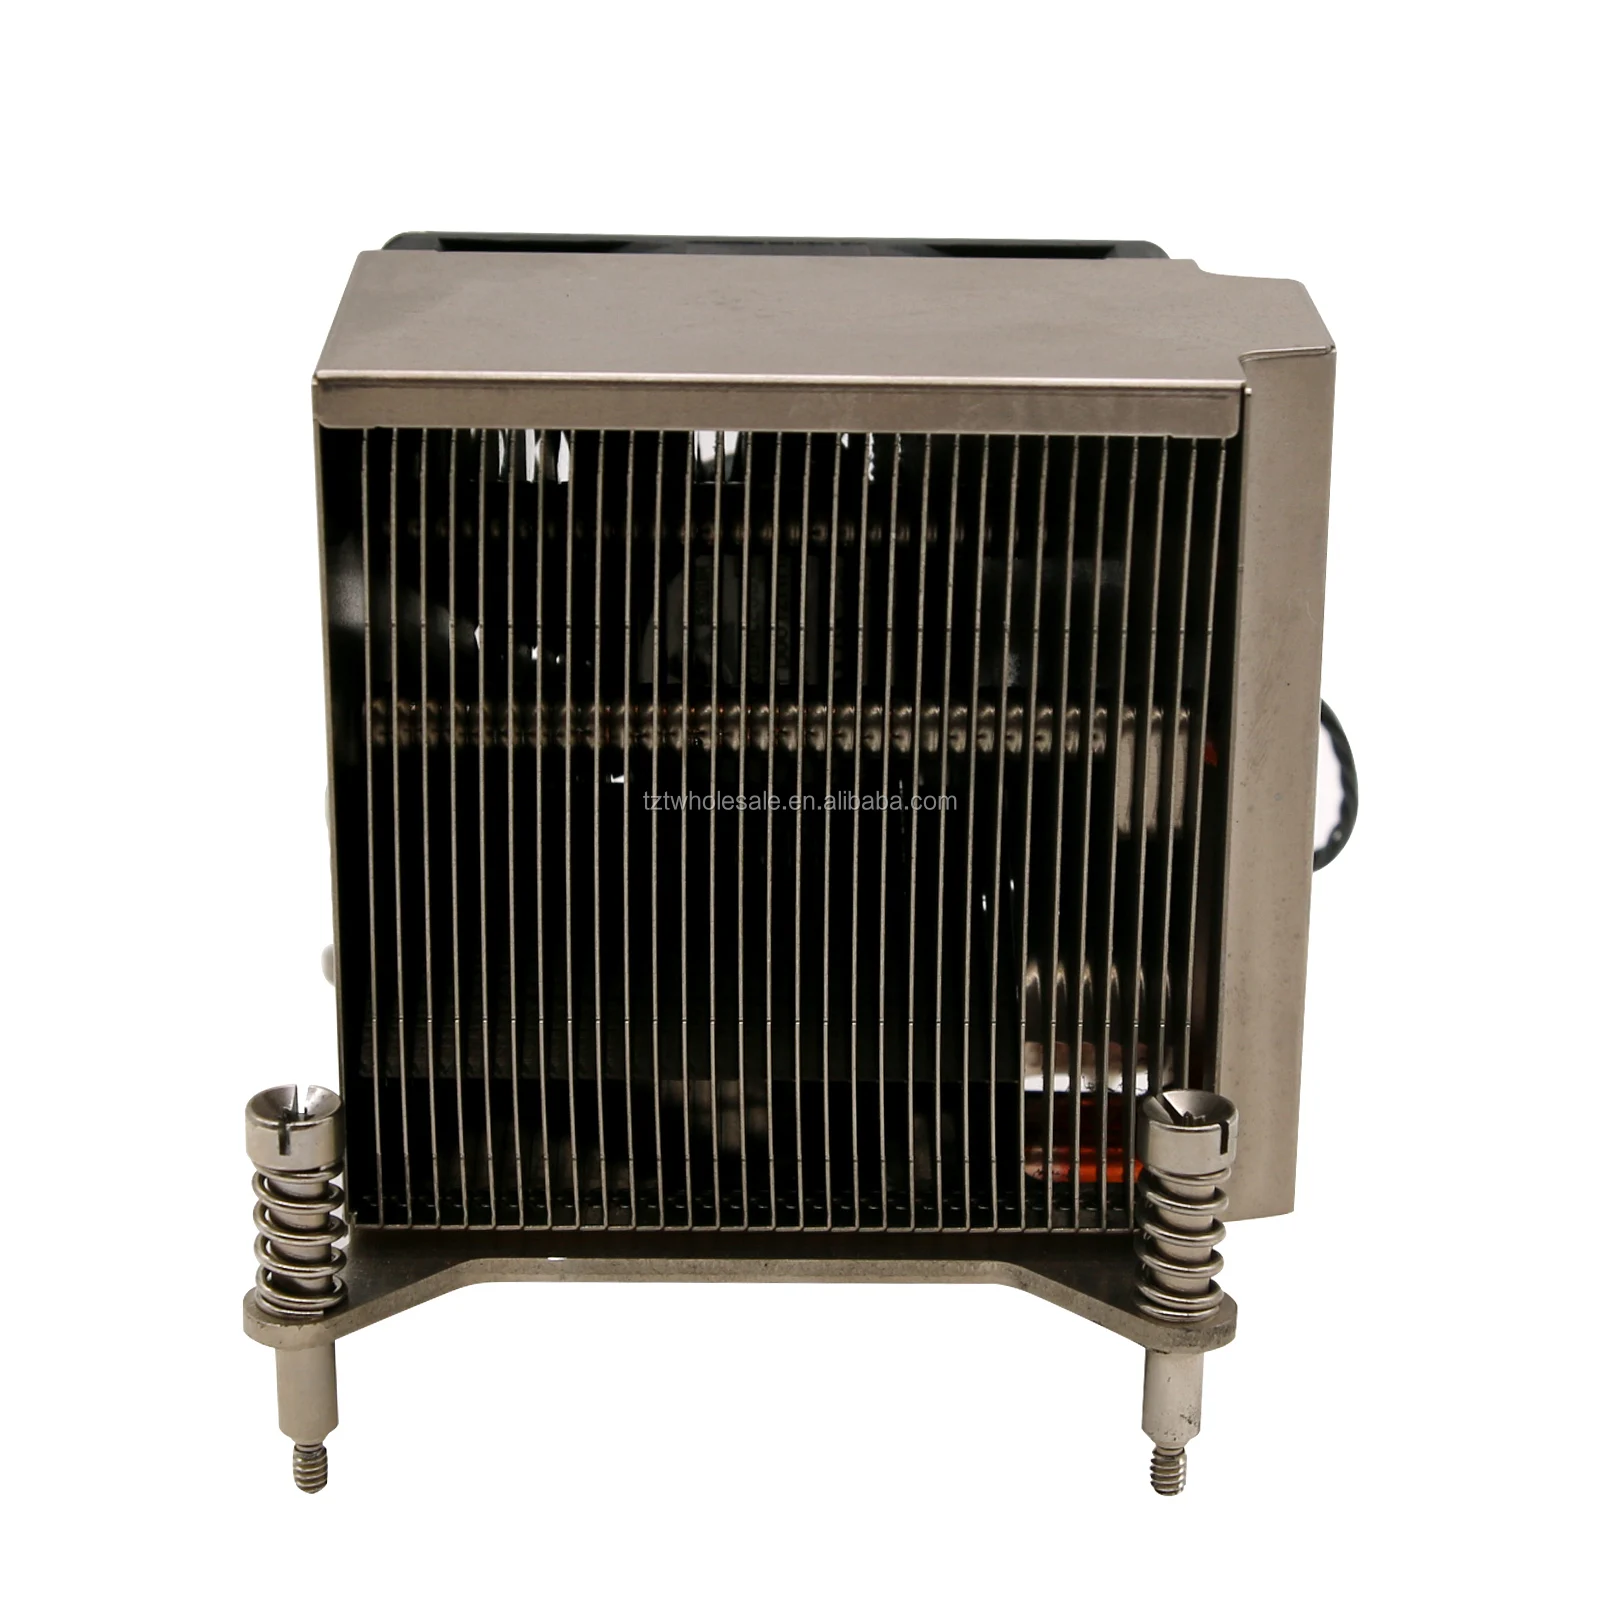 CPU Radiator Cooler Replacement for HP Z600 Z800 Workstation Radiator Fan 